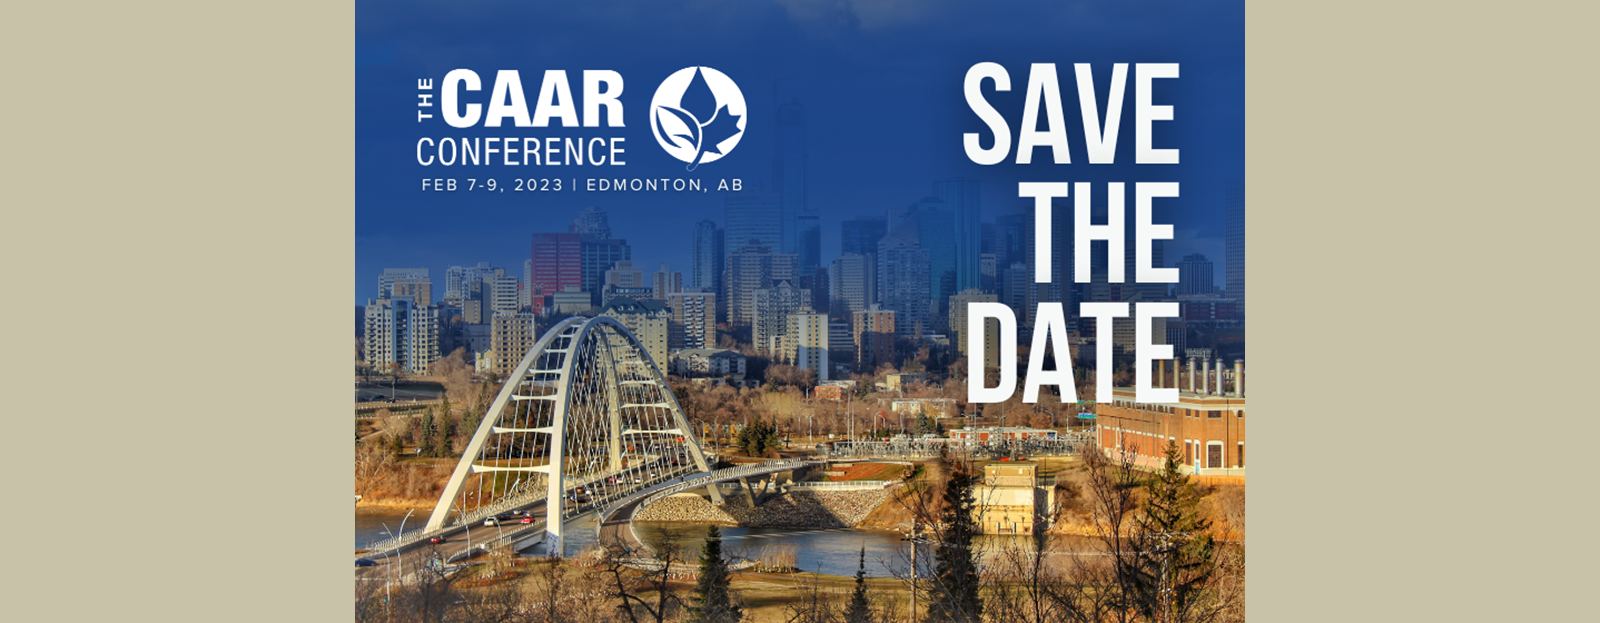 Save the Date 2023 Conference